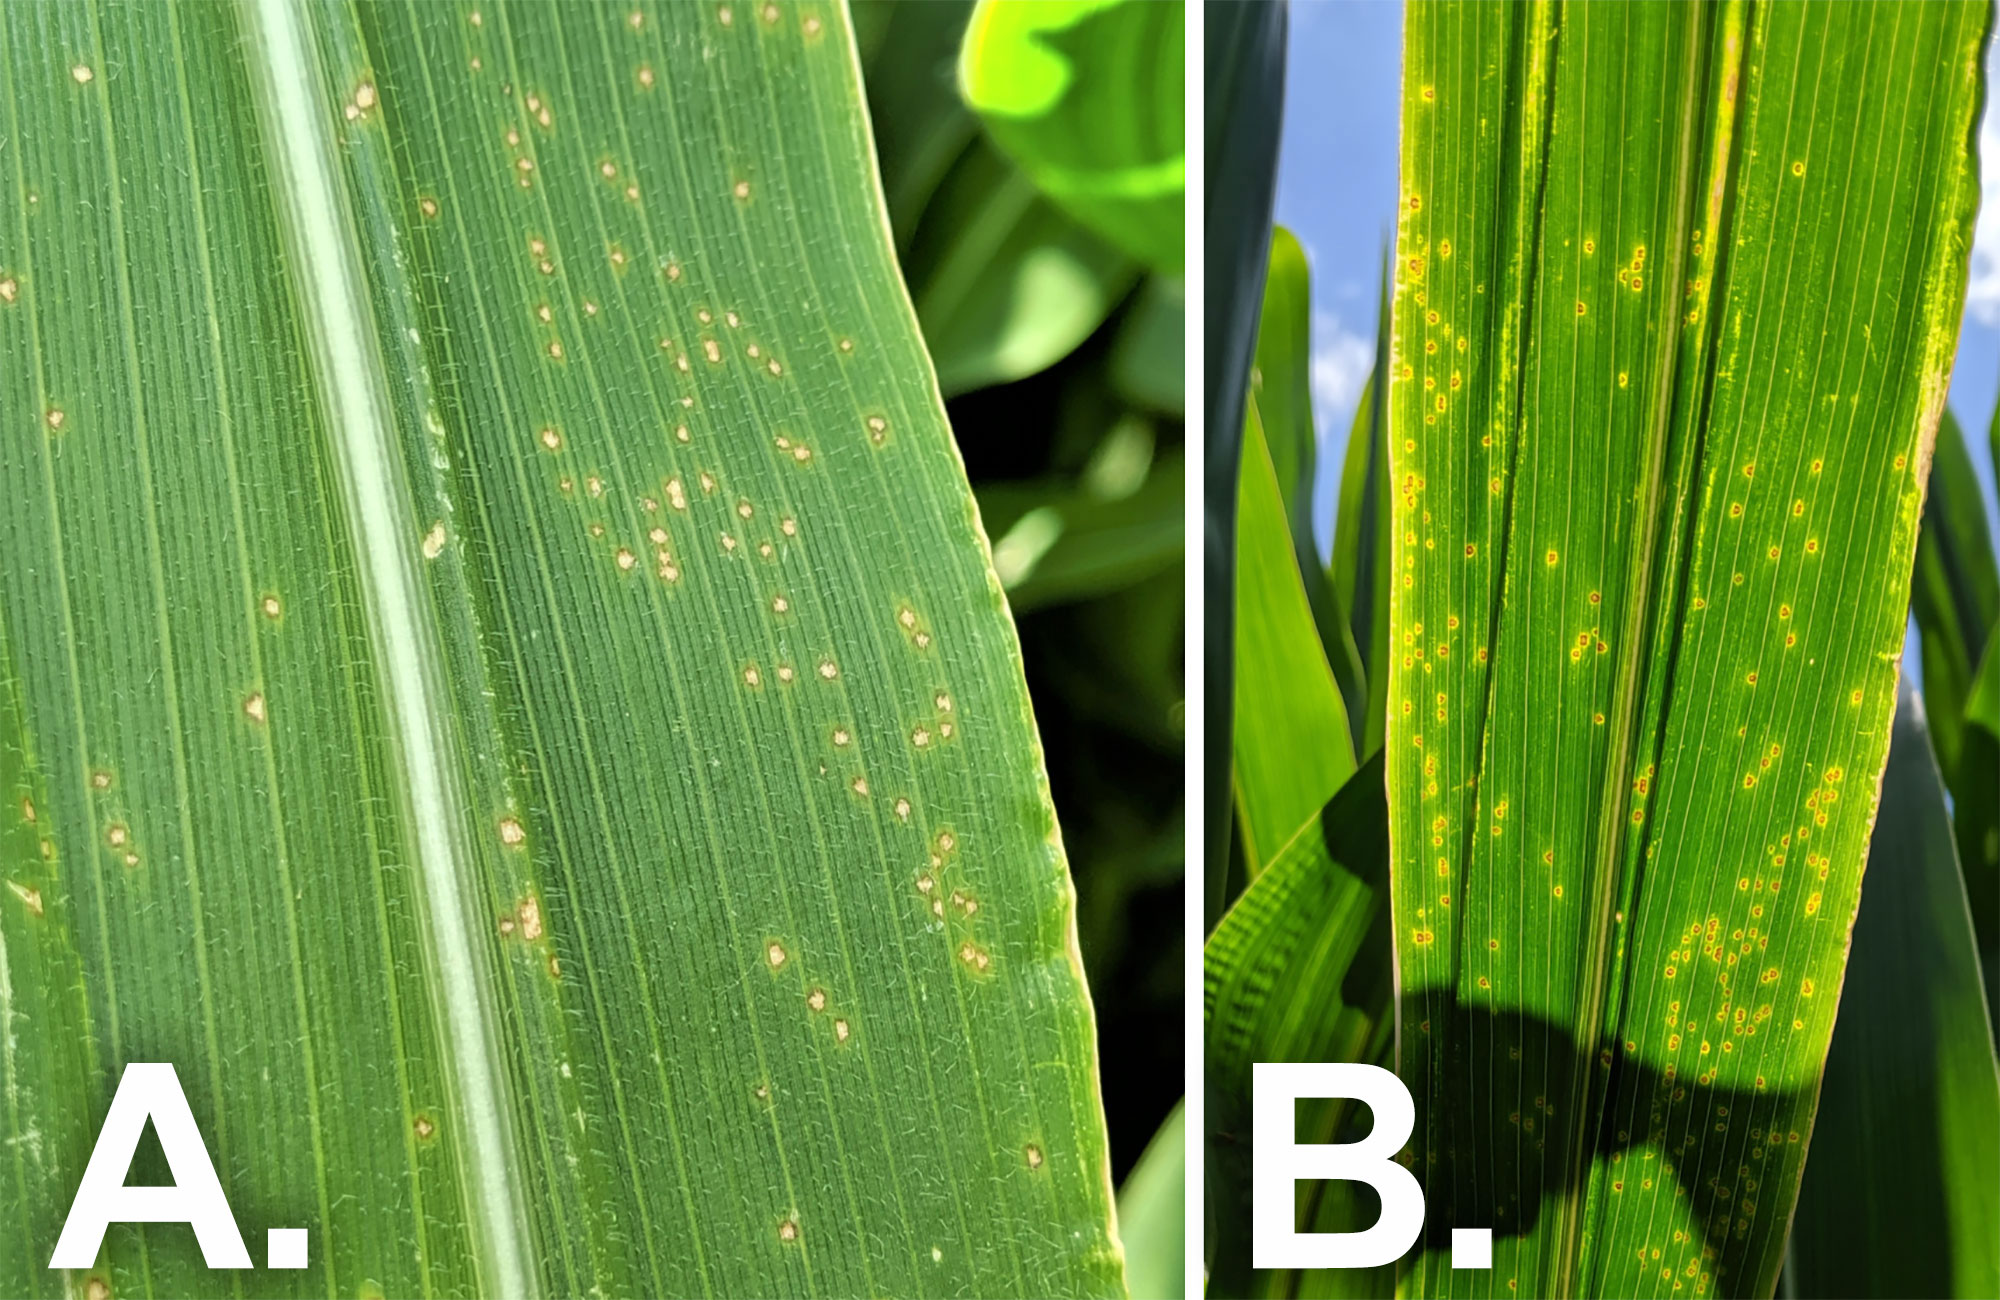 Two corn leaves with small, translucent circular lesions with yellow halos surrounding the lesions.